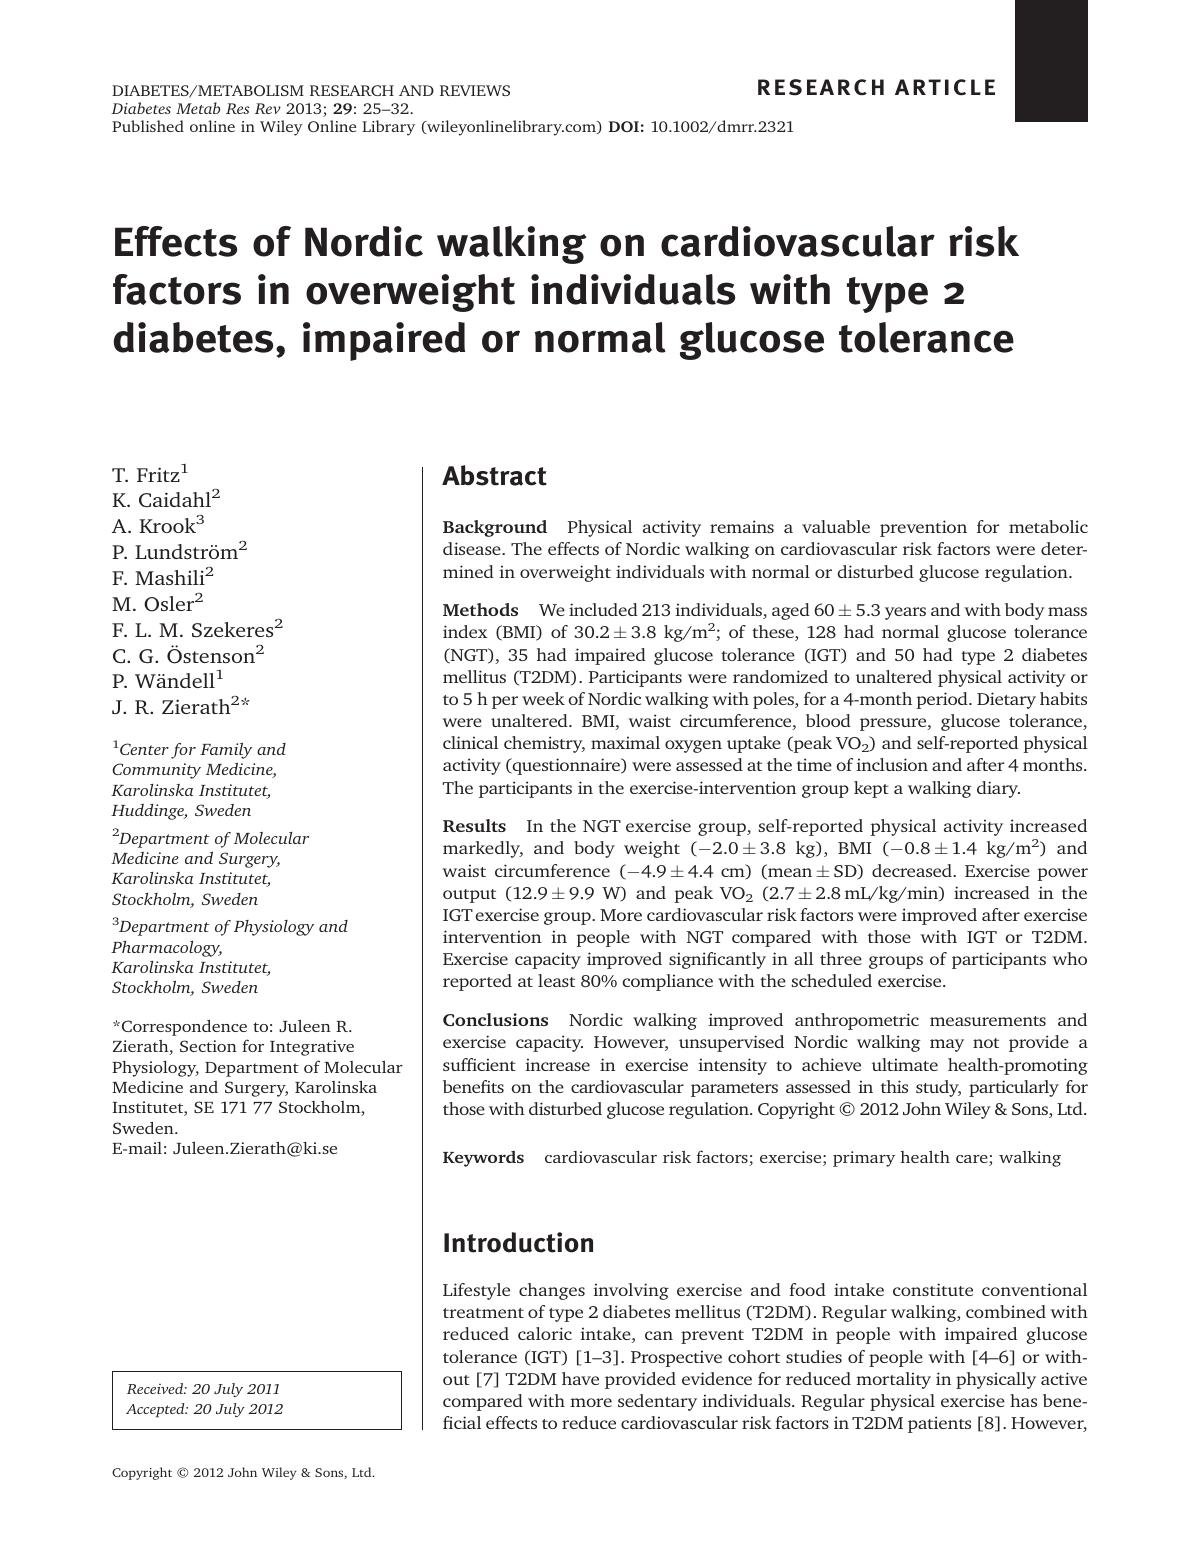 Effects of Nordic walking on cardiovascular risk factors in overweight individuals with type 2 diabe